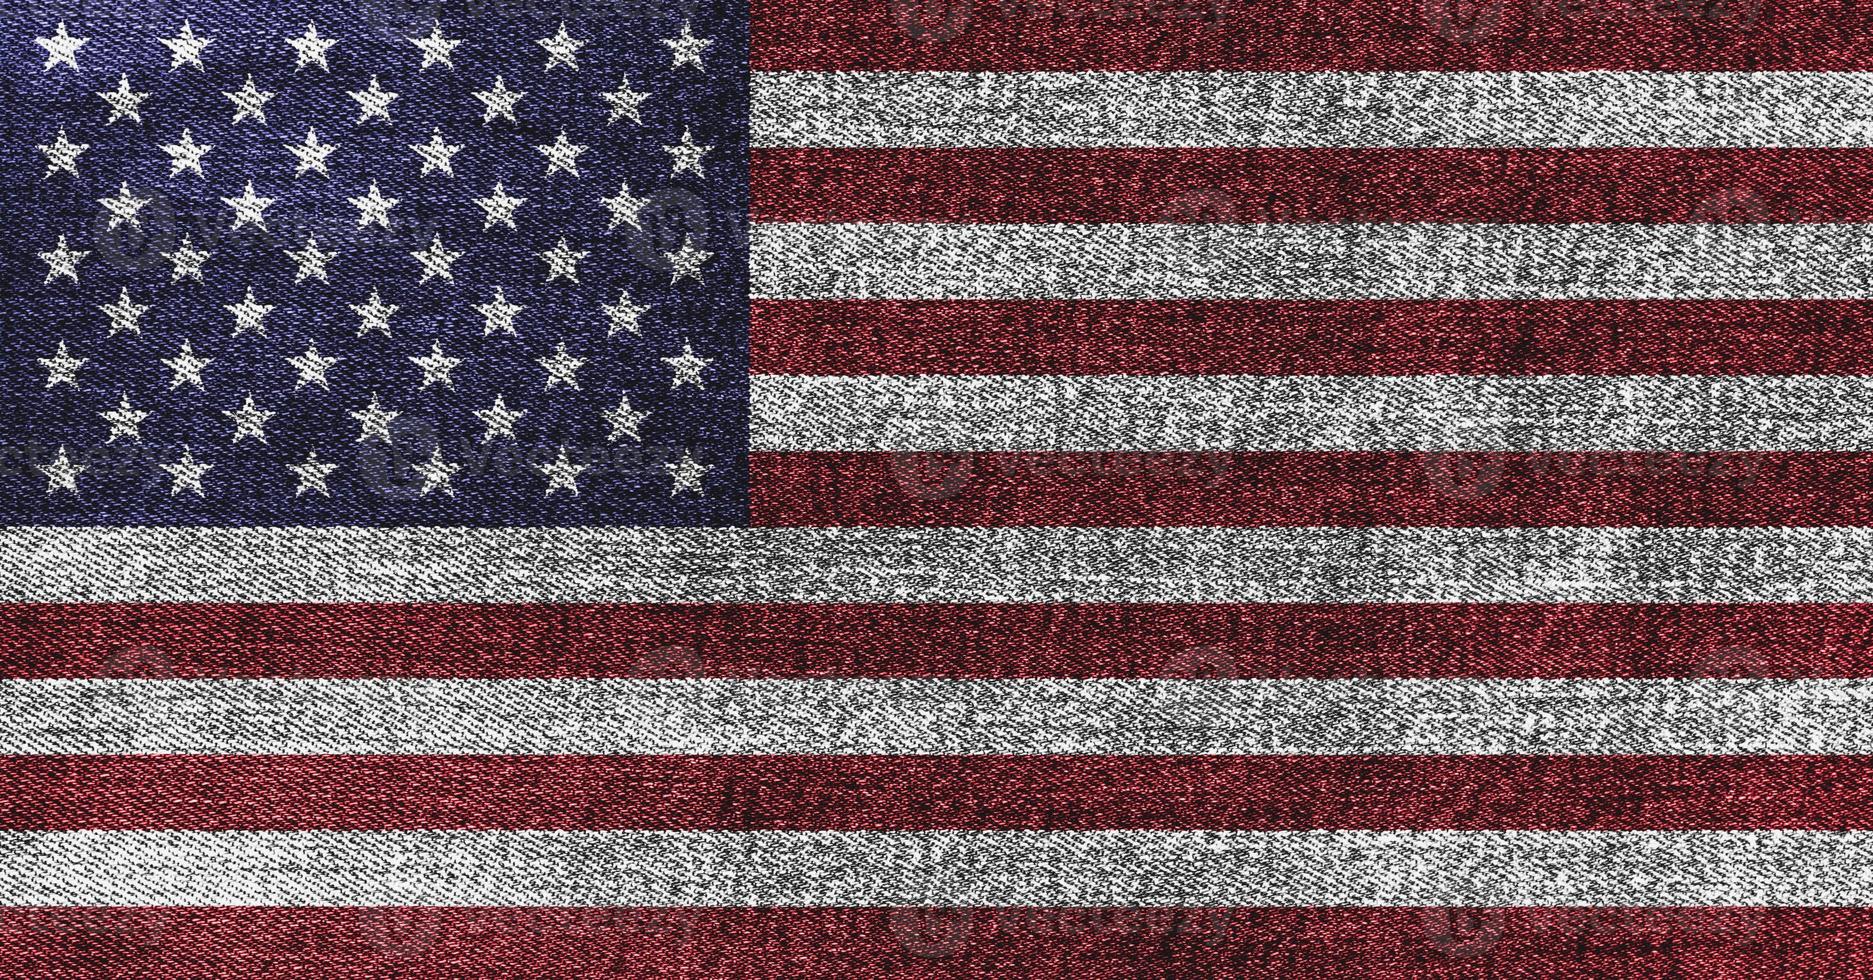 Grunge American flag on denim jeans textured abstract background concept. The National USA flag on denim frabric texture. photo